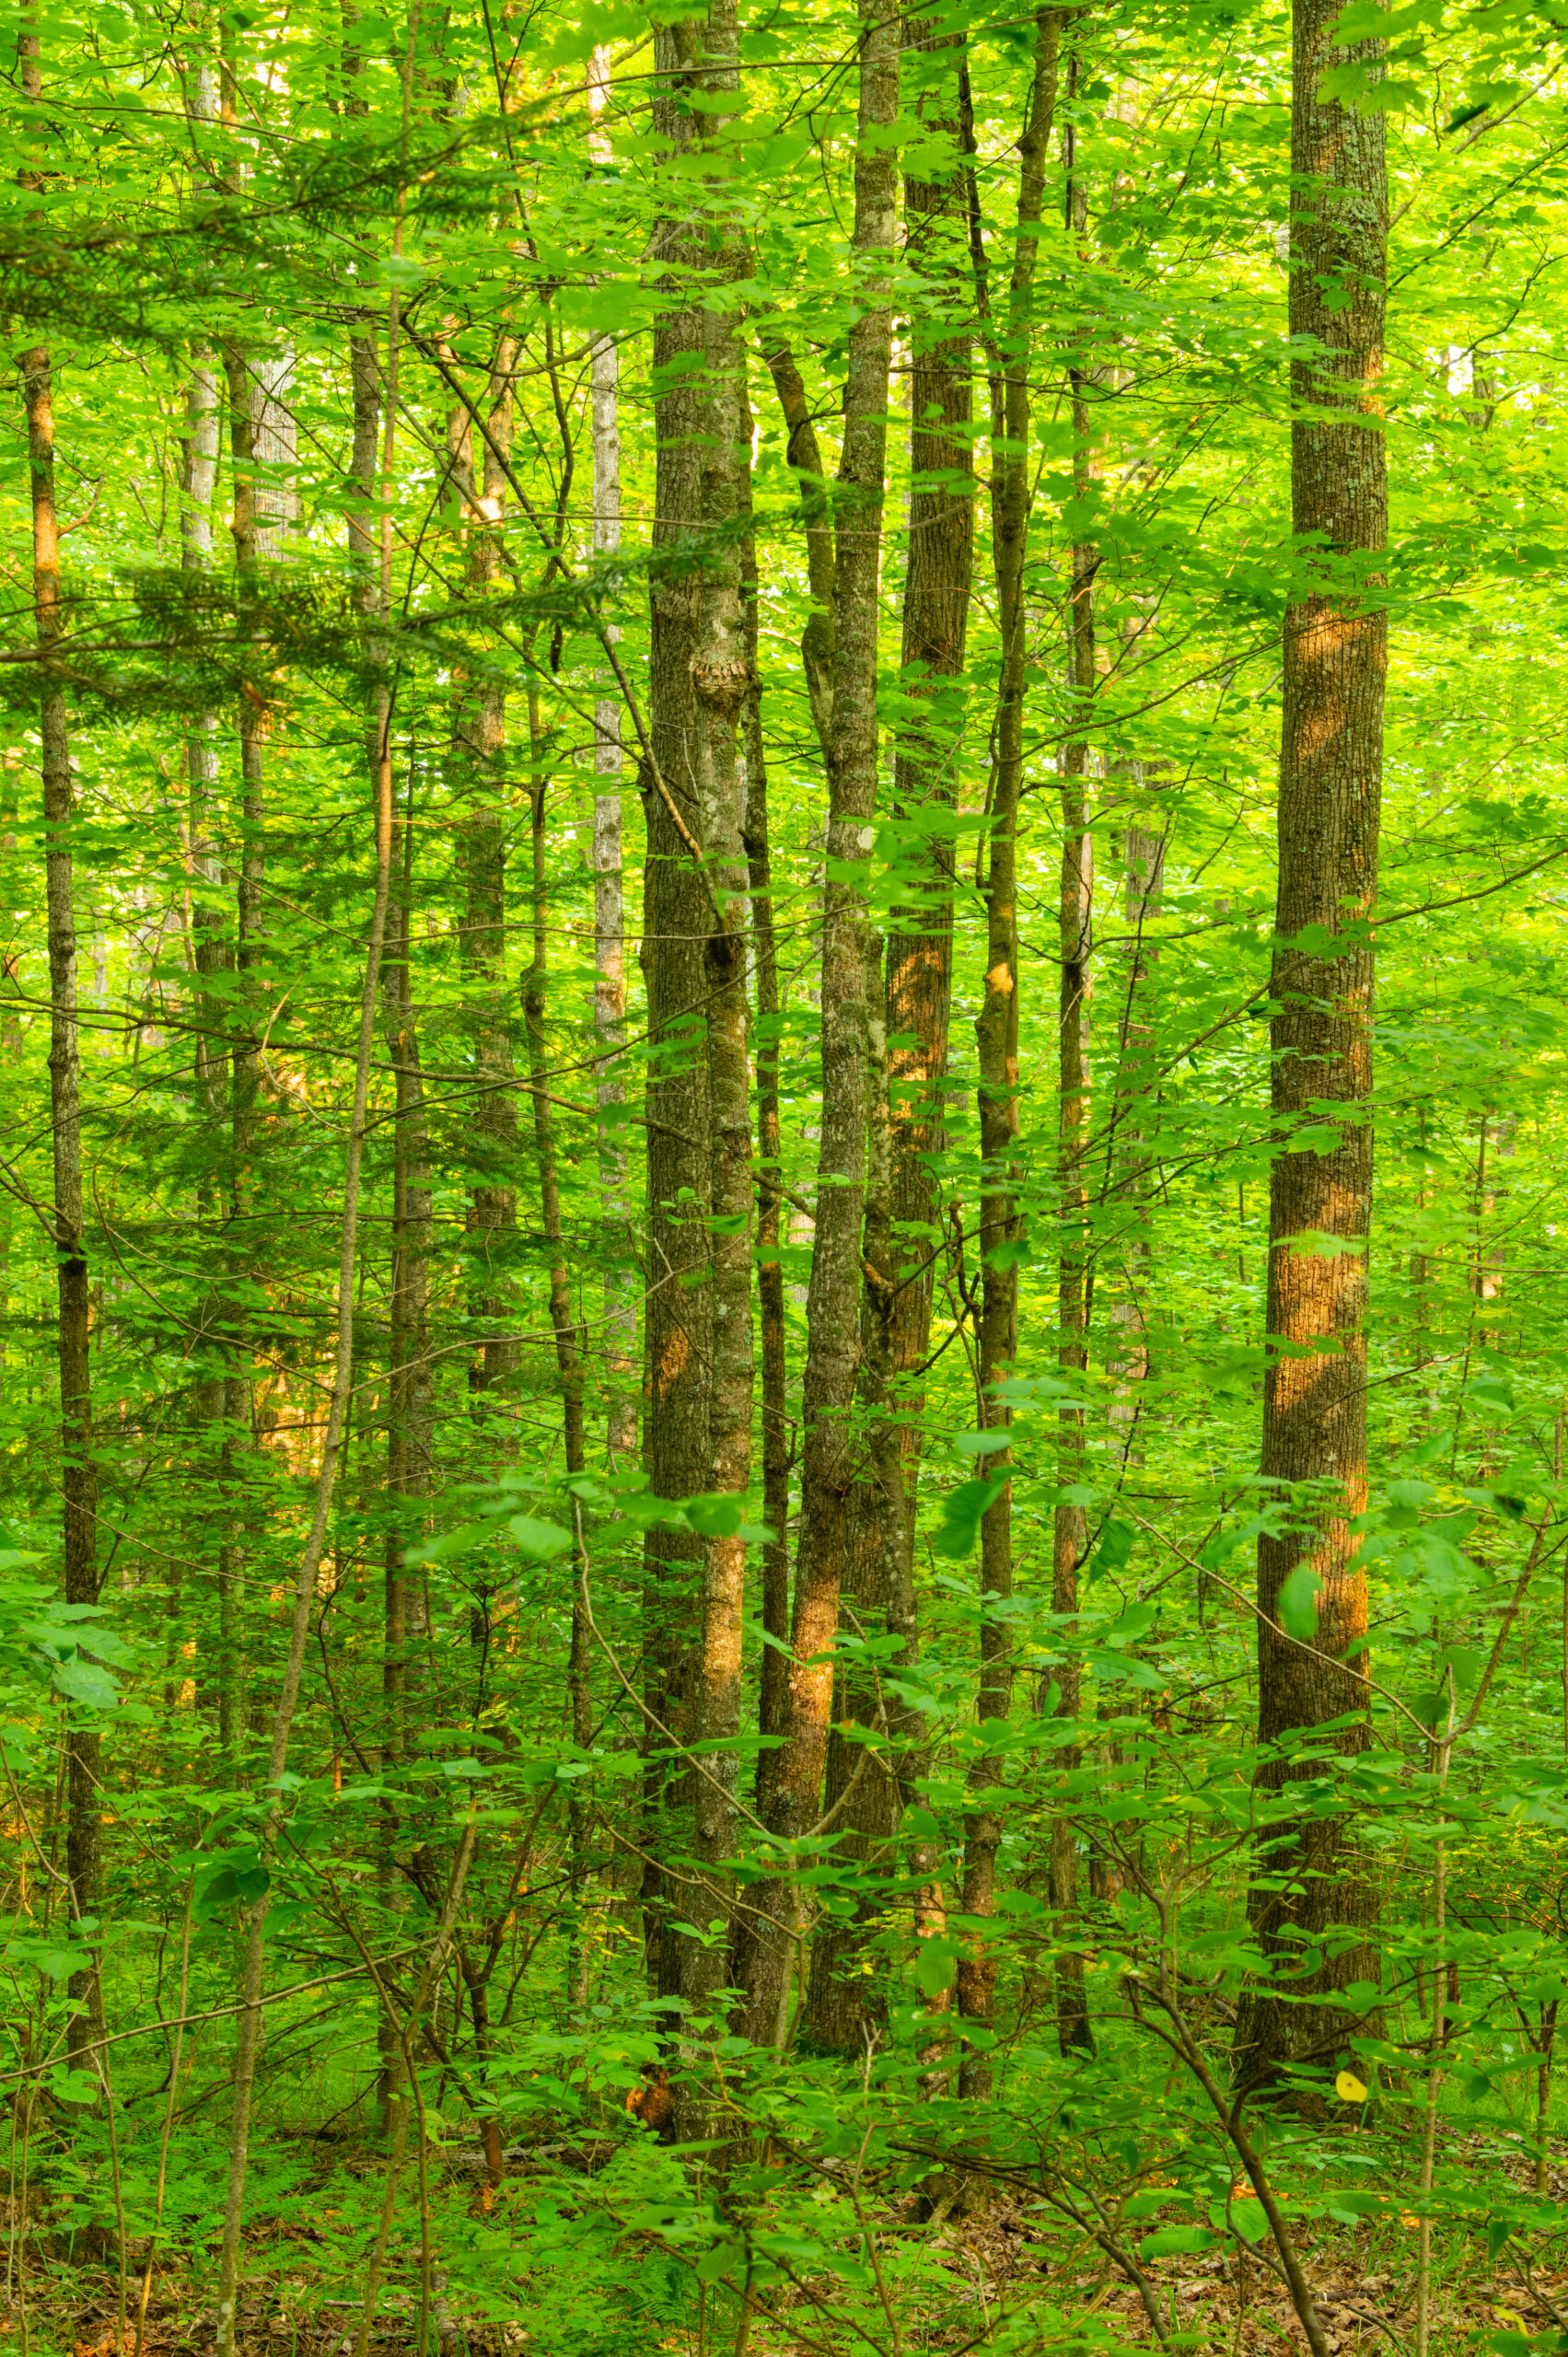 Bright green forest with tall, straight trees